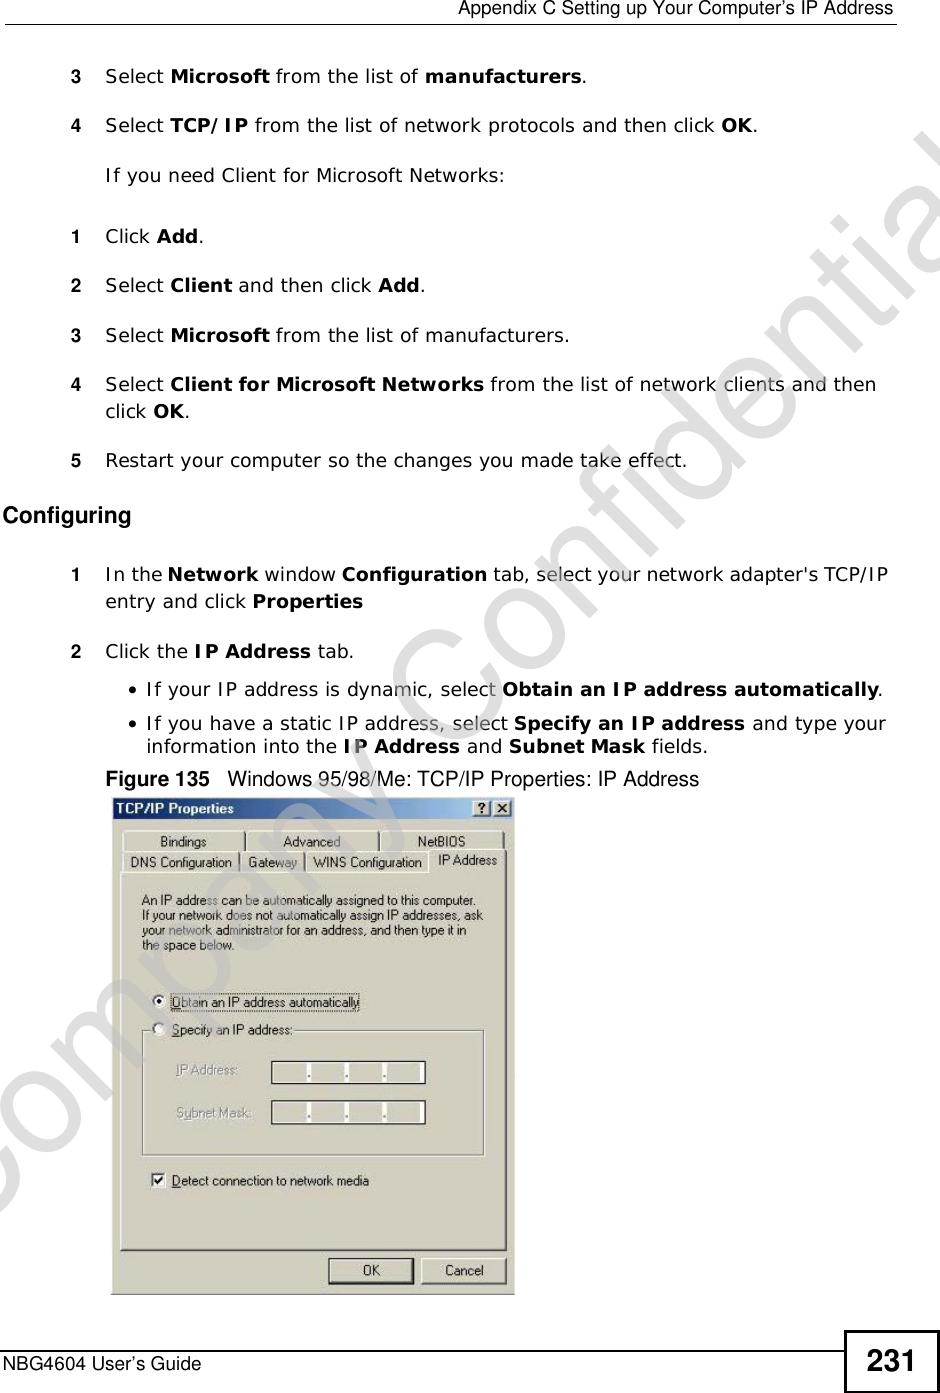  Appendix CSetting up Your Computer’s IP AddressNBG4604 User’s Guide 2313Select Microsoft from the list of manufacturers.4Select TCP/IP from the list of network protocols and then click OK.If you need Client for Microsoft Networks:1Click Add.2Select Client and then click Add.3Select Microsoft from the list of manufacturers.4Select Client for Microsoft Networks from the list of network clients and then click OK.5Restart your computer so the changes you made take effect.Configuring1In the Network window Configuration tab, select your network adapter&apos;s TCP/IP entry and click Properties2Click the IP Address tab.•If your IP address is dynamic, select Obtain an IP address automatically.•If you have a static IP address, select Specify an IP address and type your information into the IP Address and Subnet Mask fields.Figure 135   Windows 95/98/Me: TCP/IP Properties: IP AddressCompany Confidential